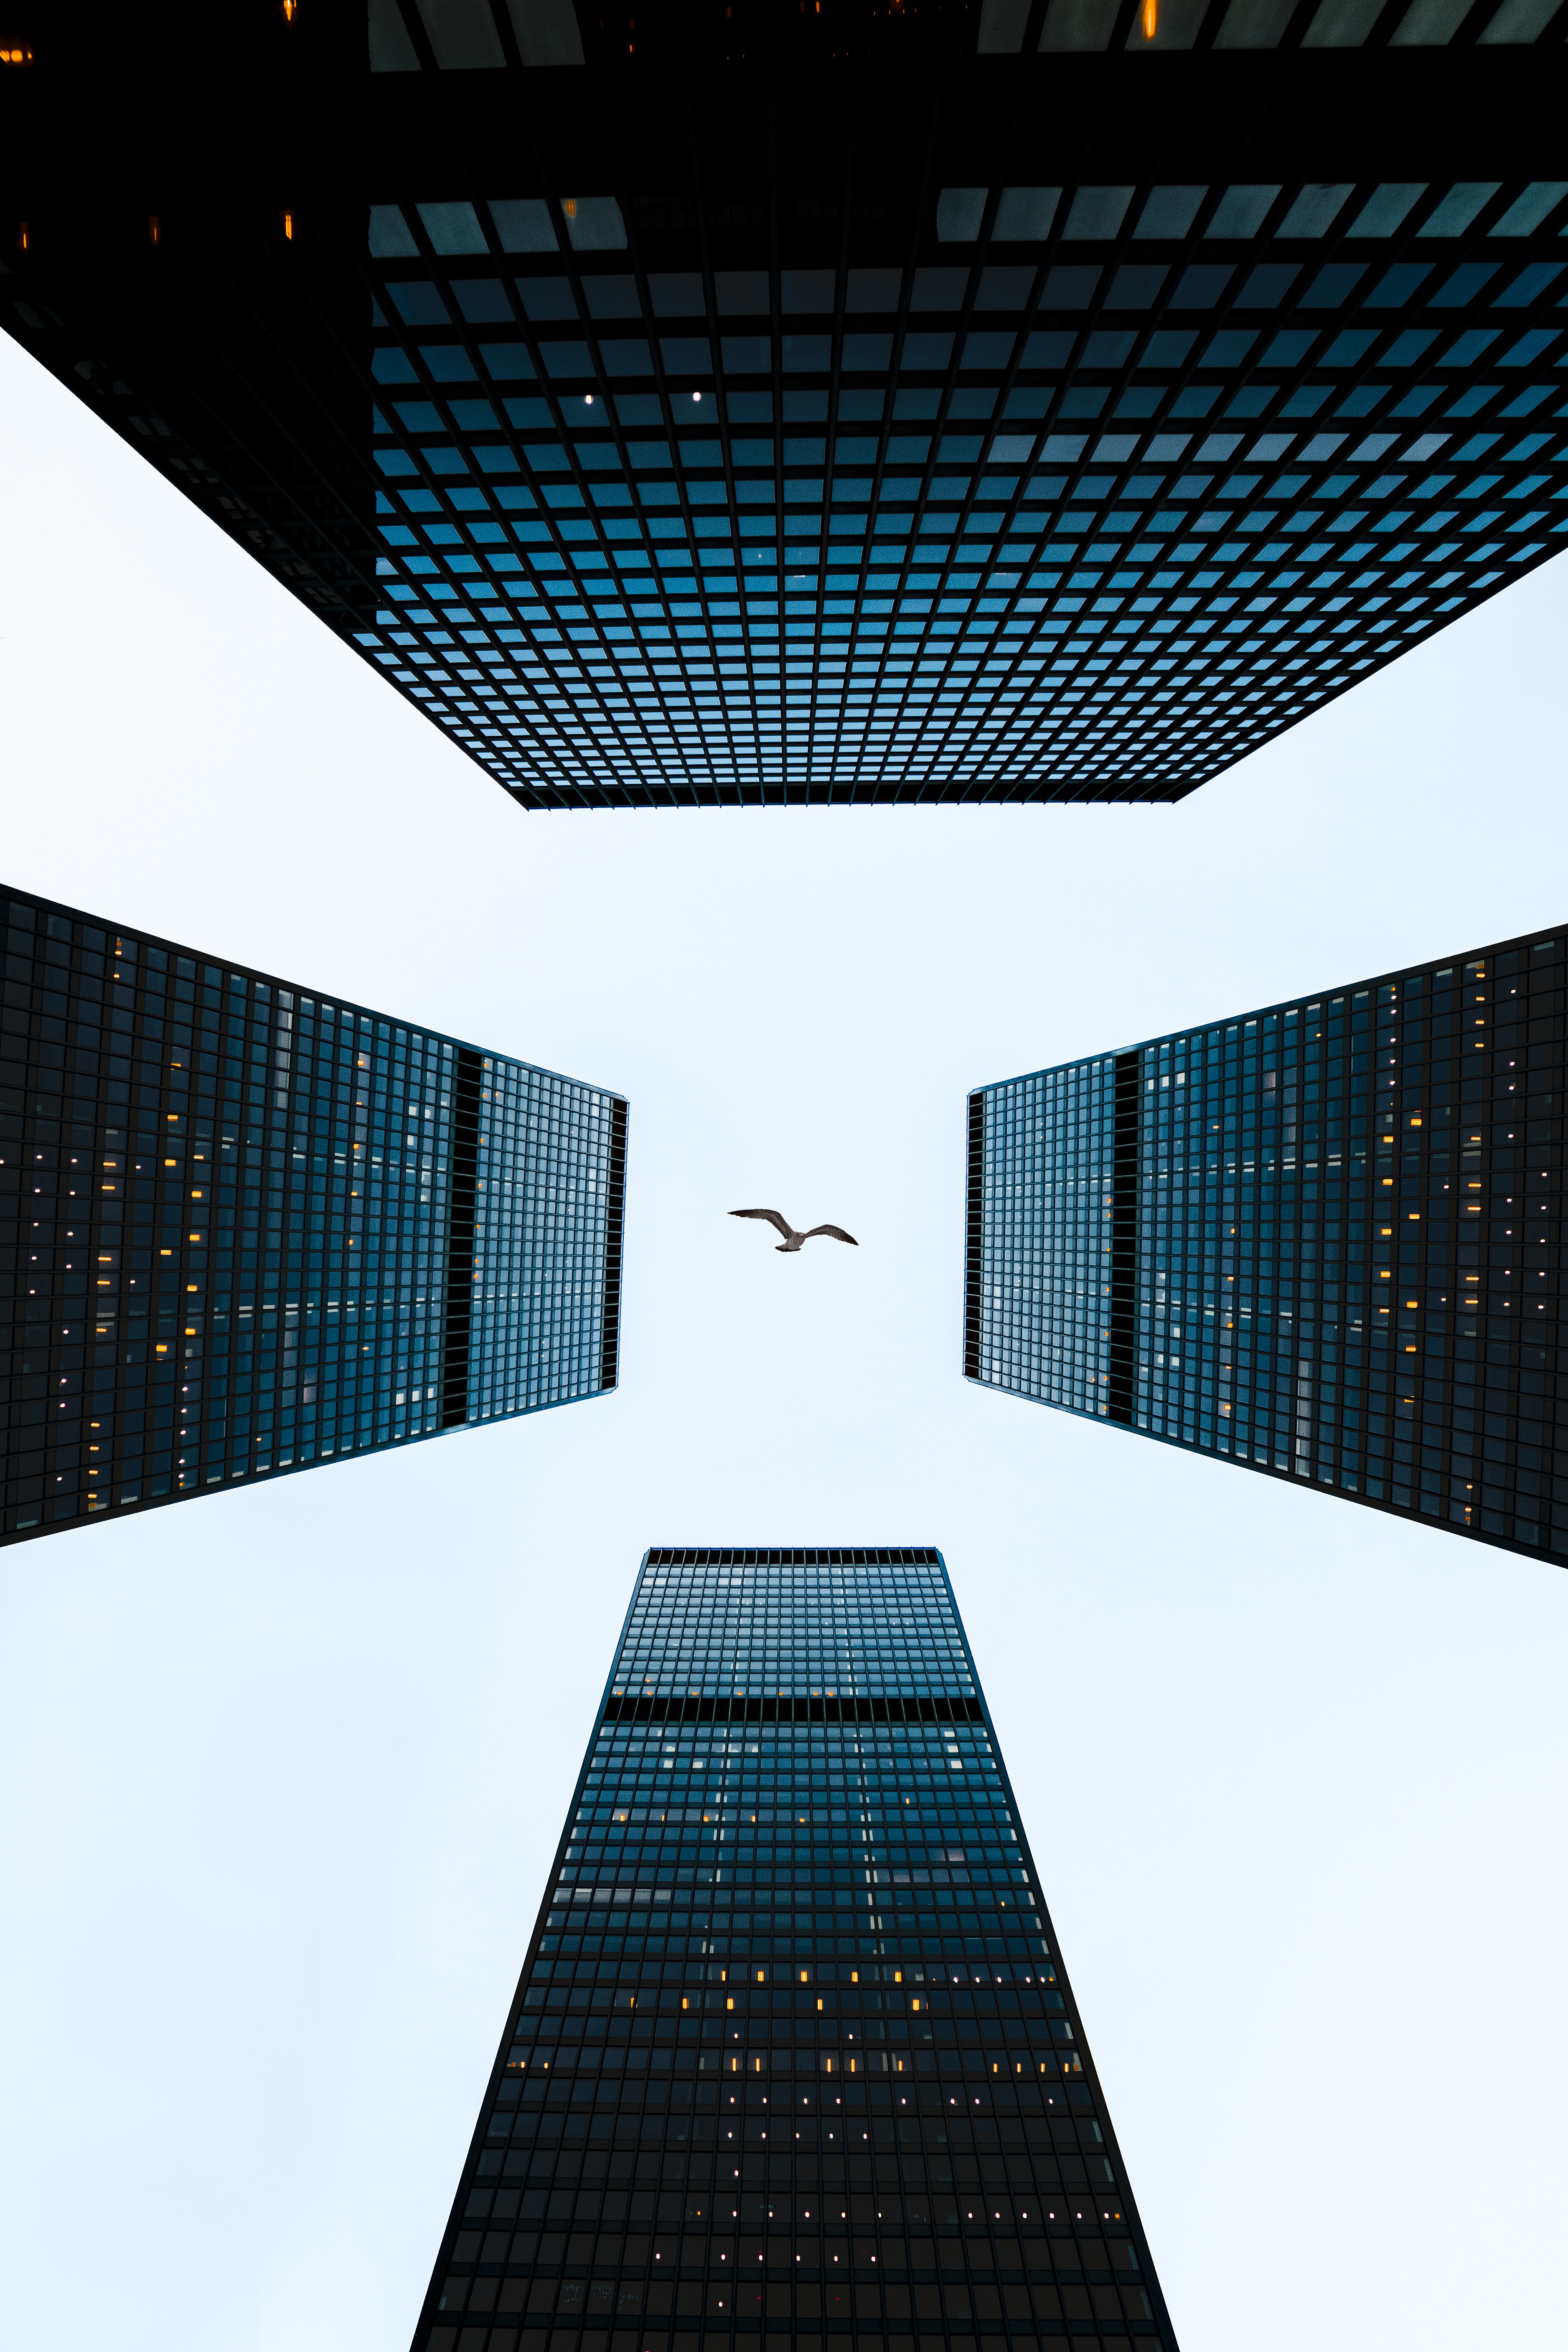 towers, minimalism, skyscrapers, sky, architecture, building, bird, tower